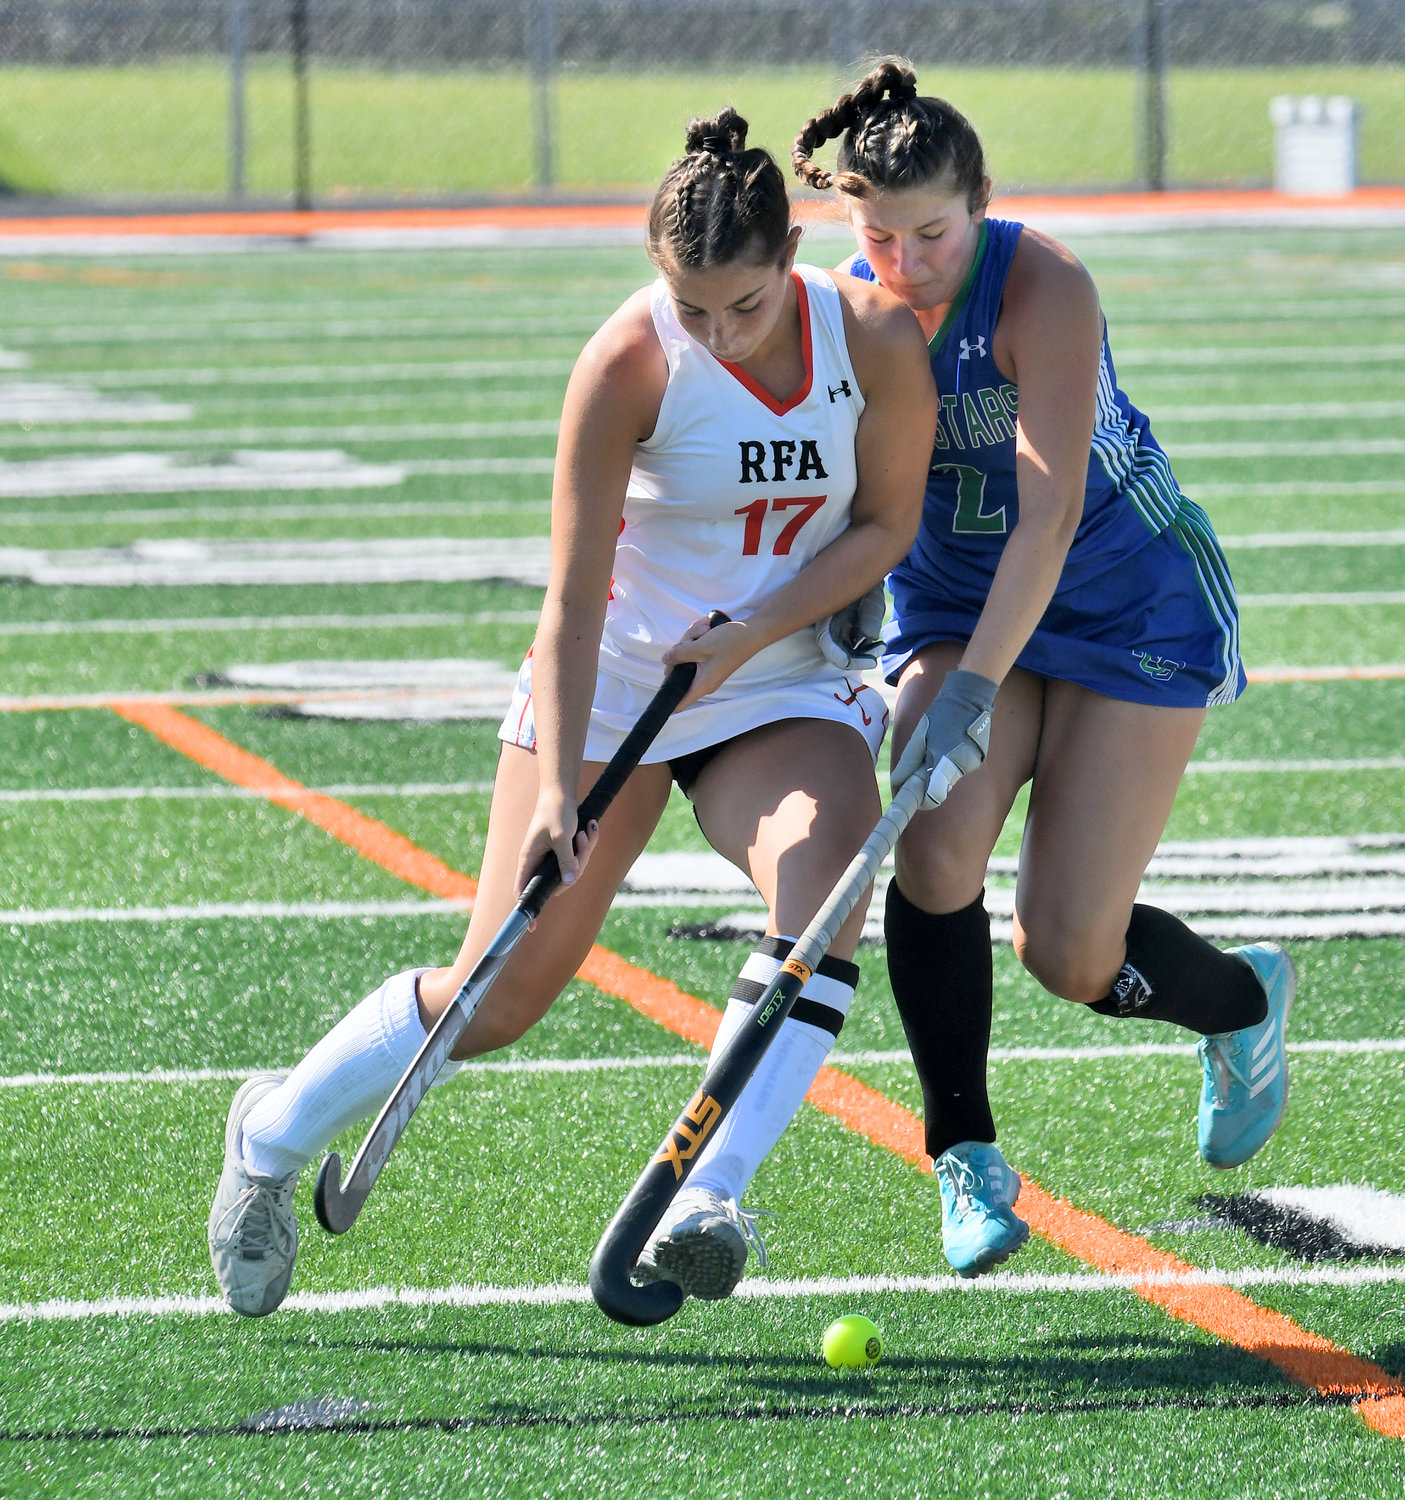 Rome Free Academy's Alyssa Nardslico works up the field defended by Cicero-North Syracuse's Maddi Brefka during the first half of the Black Knights' season opener at RFA Stadium Friday. The Black Knights lost 5-0.